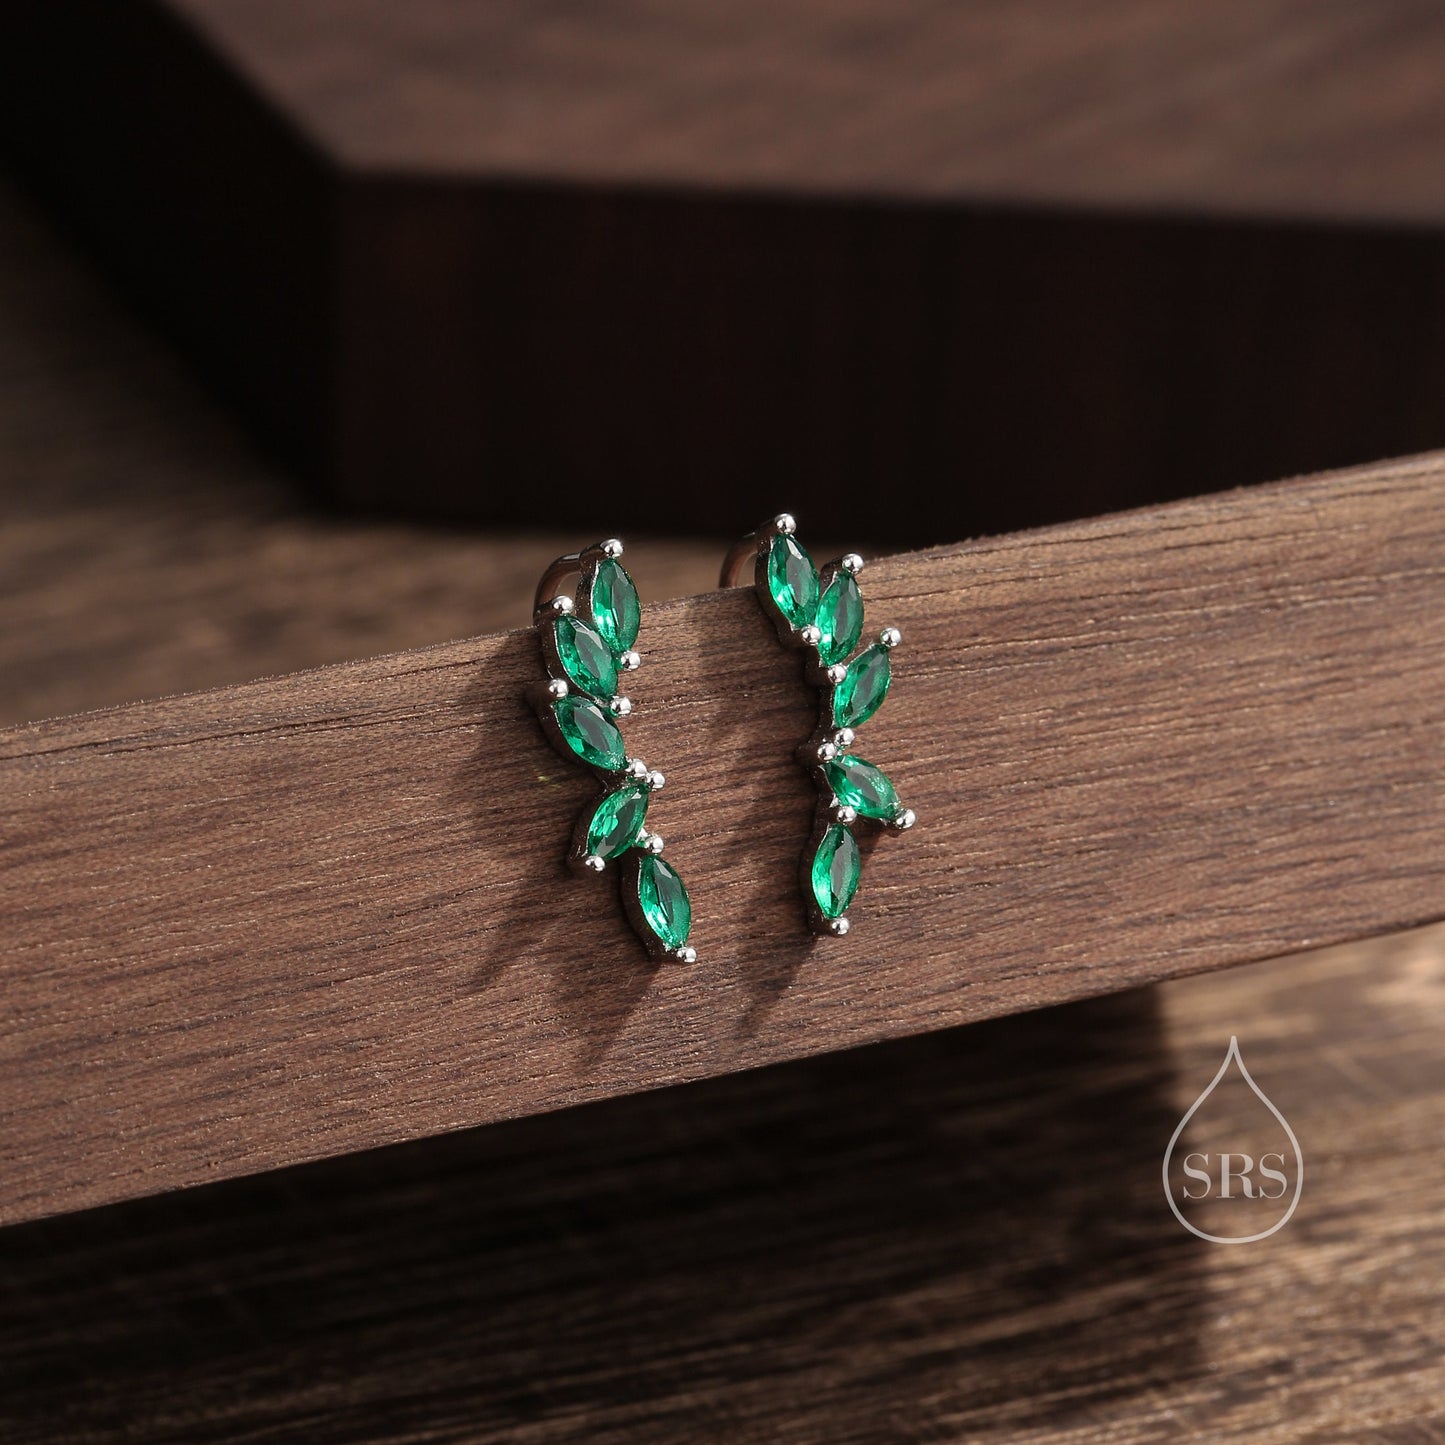 Emerald Green CZ Cluster Crawler Earrings in Sterling Silver, Silver or Gold, Green CZ Marquise Ear Crawlers, CZ Cluster Earrings